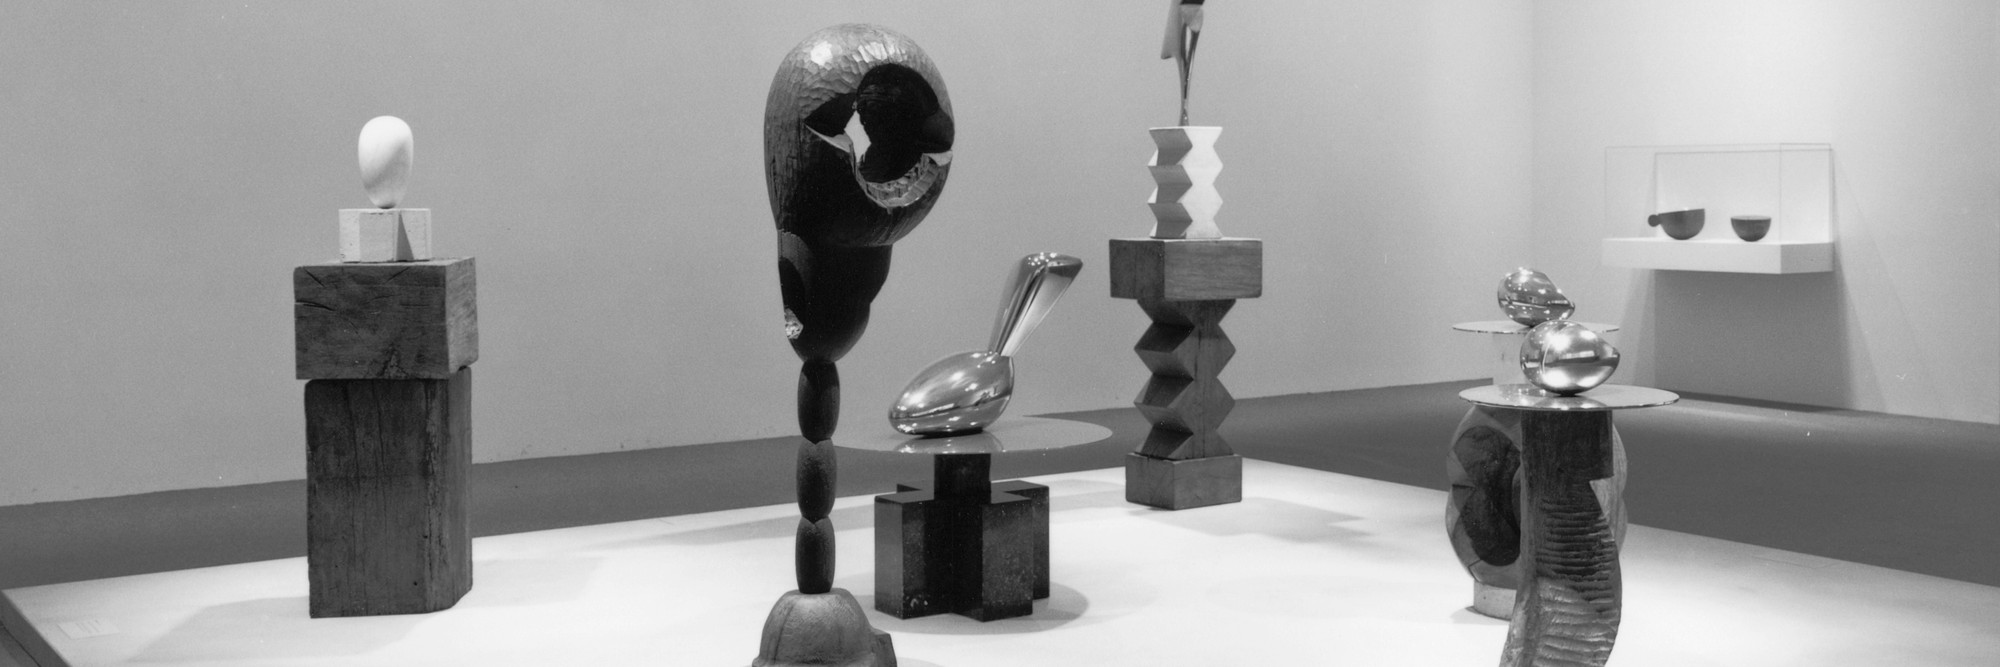 Installation view of Brancusi: Selected Masterworks from the Musée National d’Art Moderne and The Museum of Modern Art, New York at The Museum of Modern Art, New York. Photo: Katherine Keller